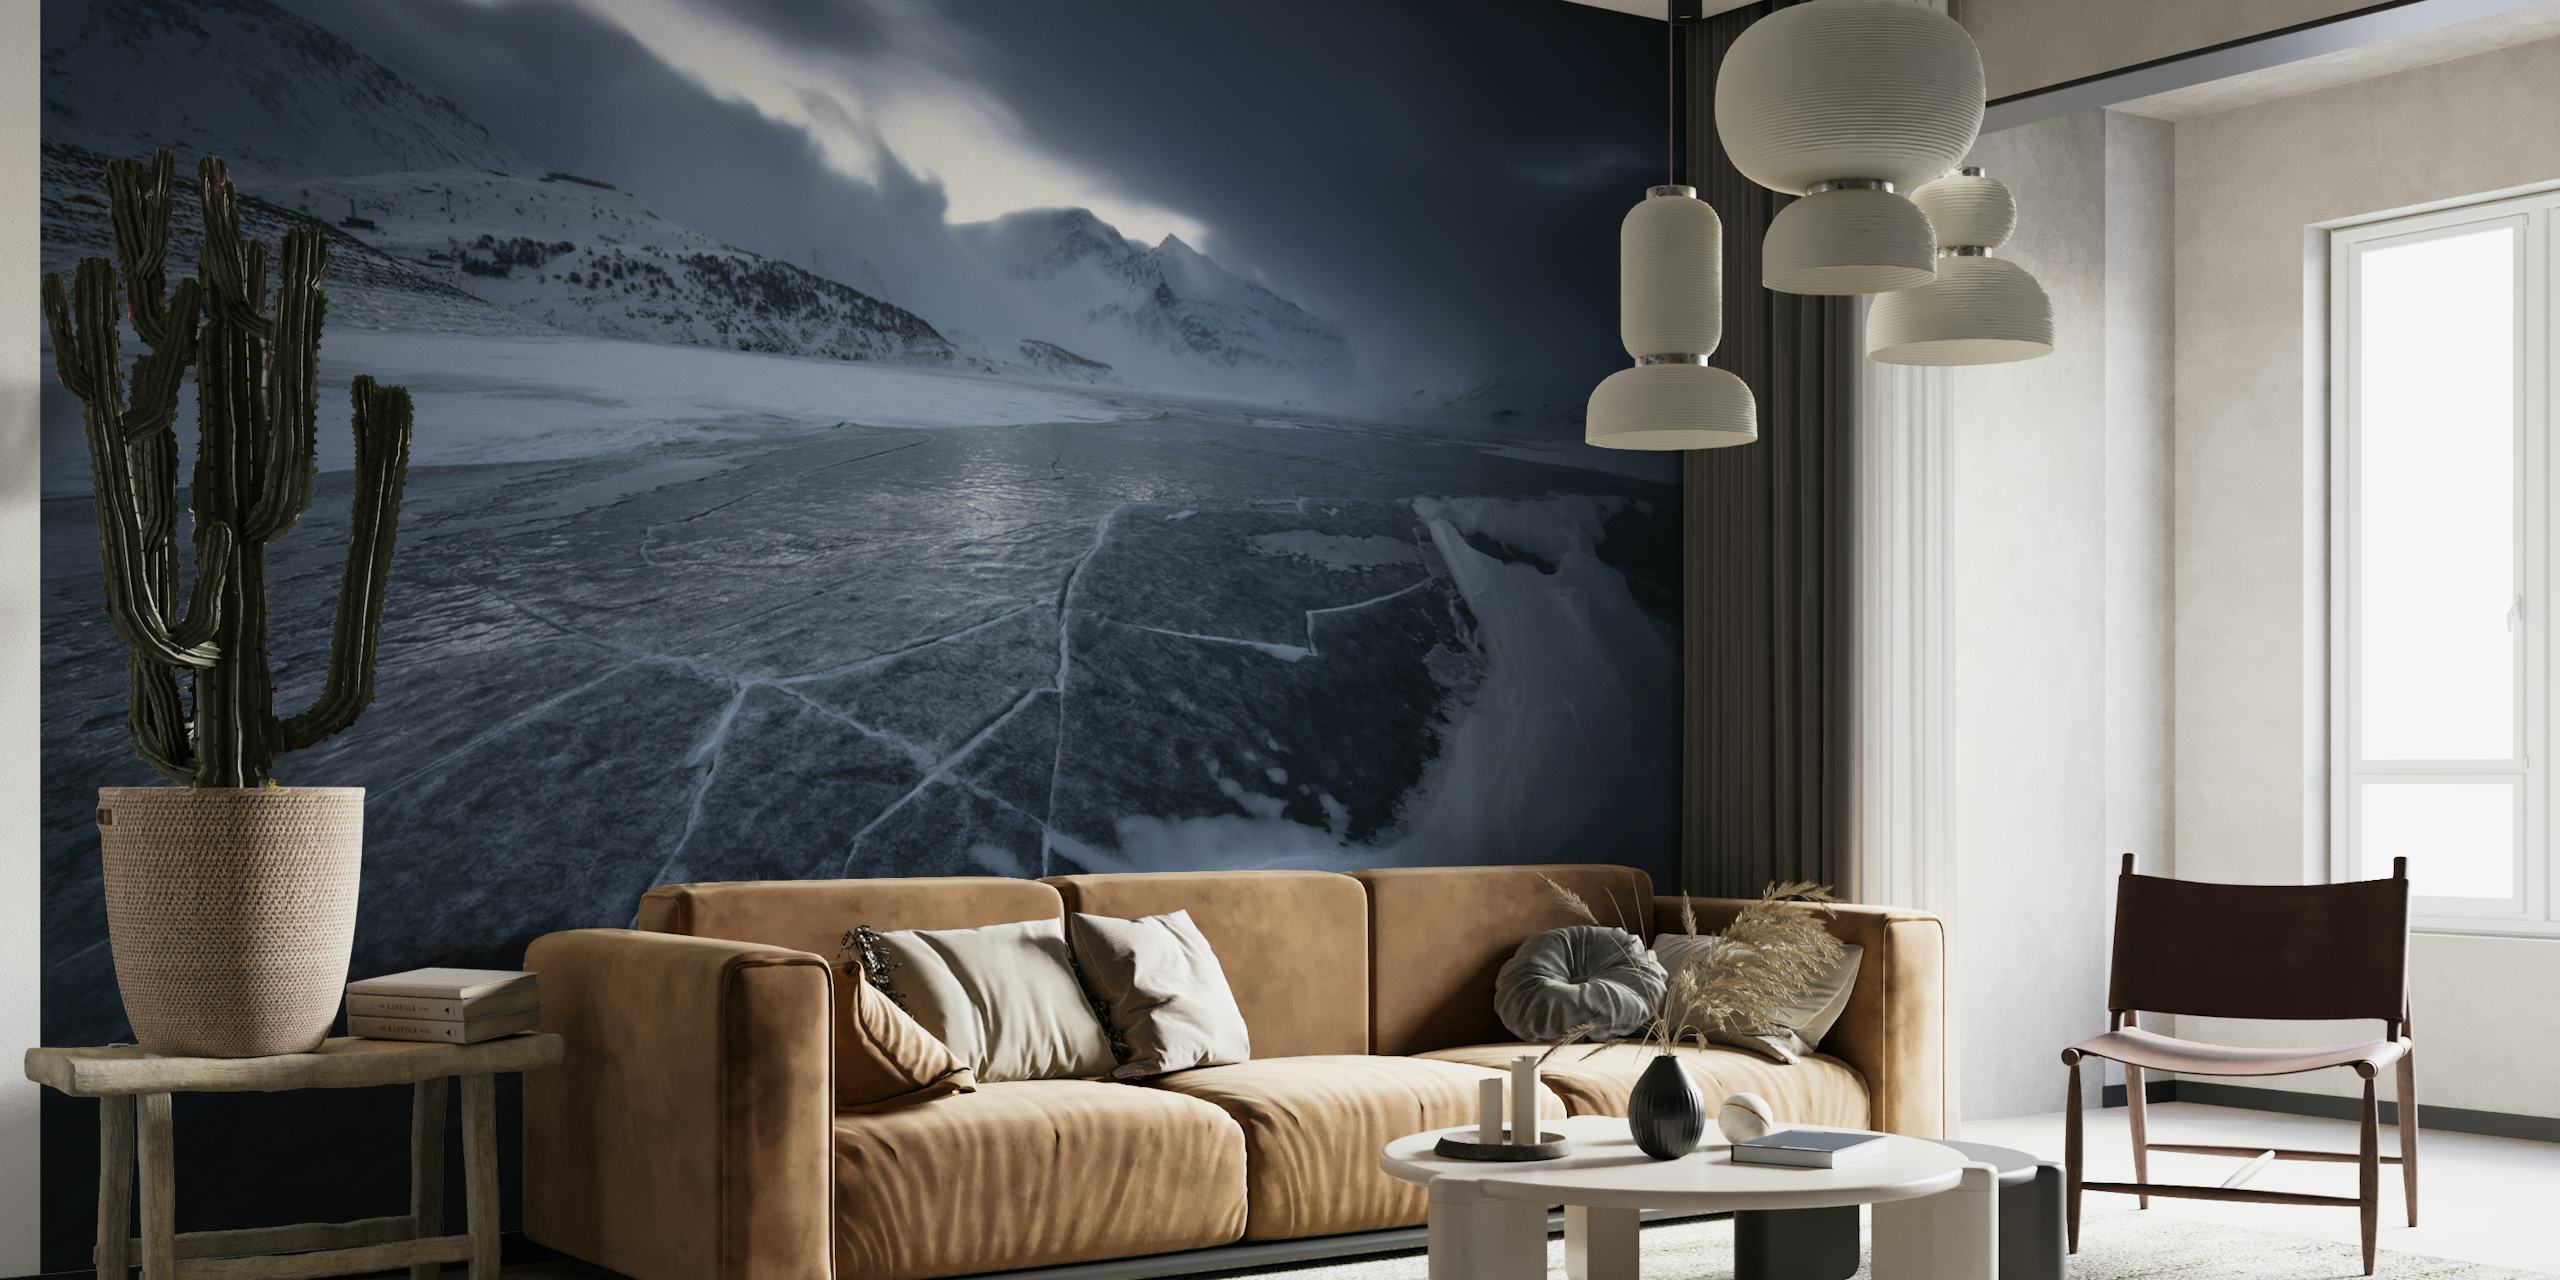 Chilly winter landscape with detailed icy surfaces under a moody sky in 'The Grip of Ice' wall mural